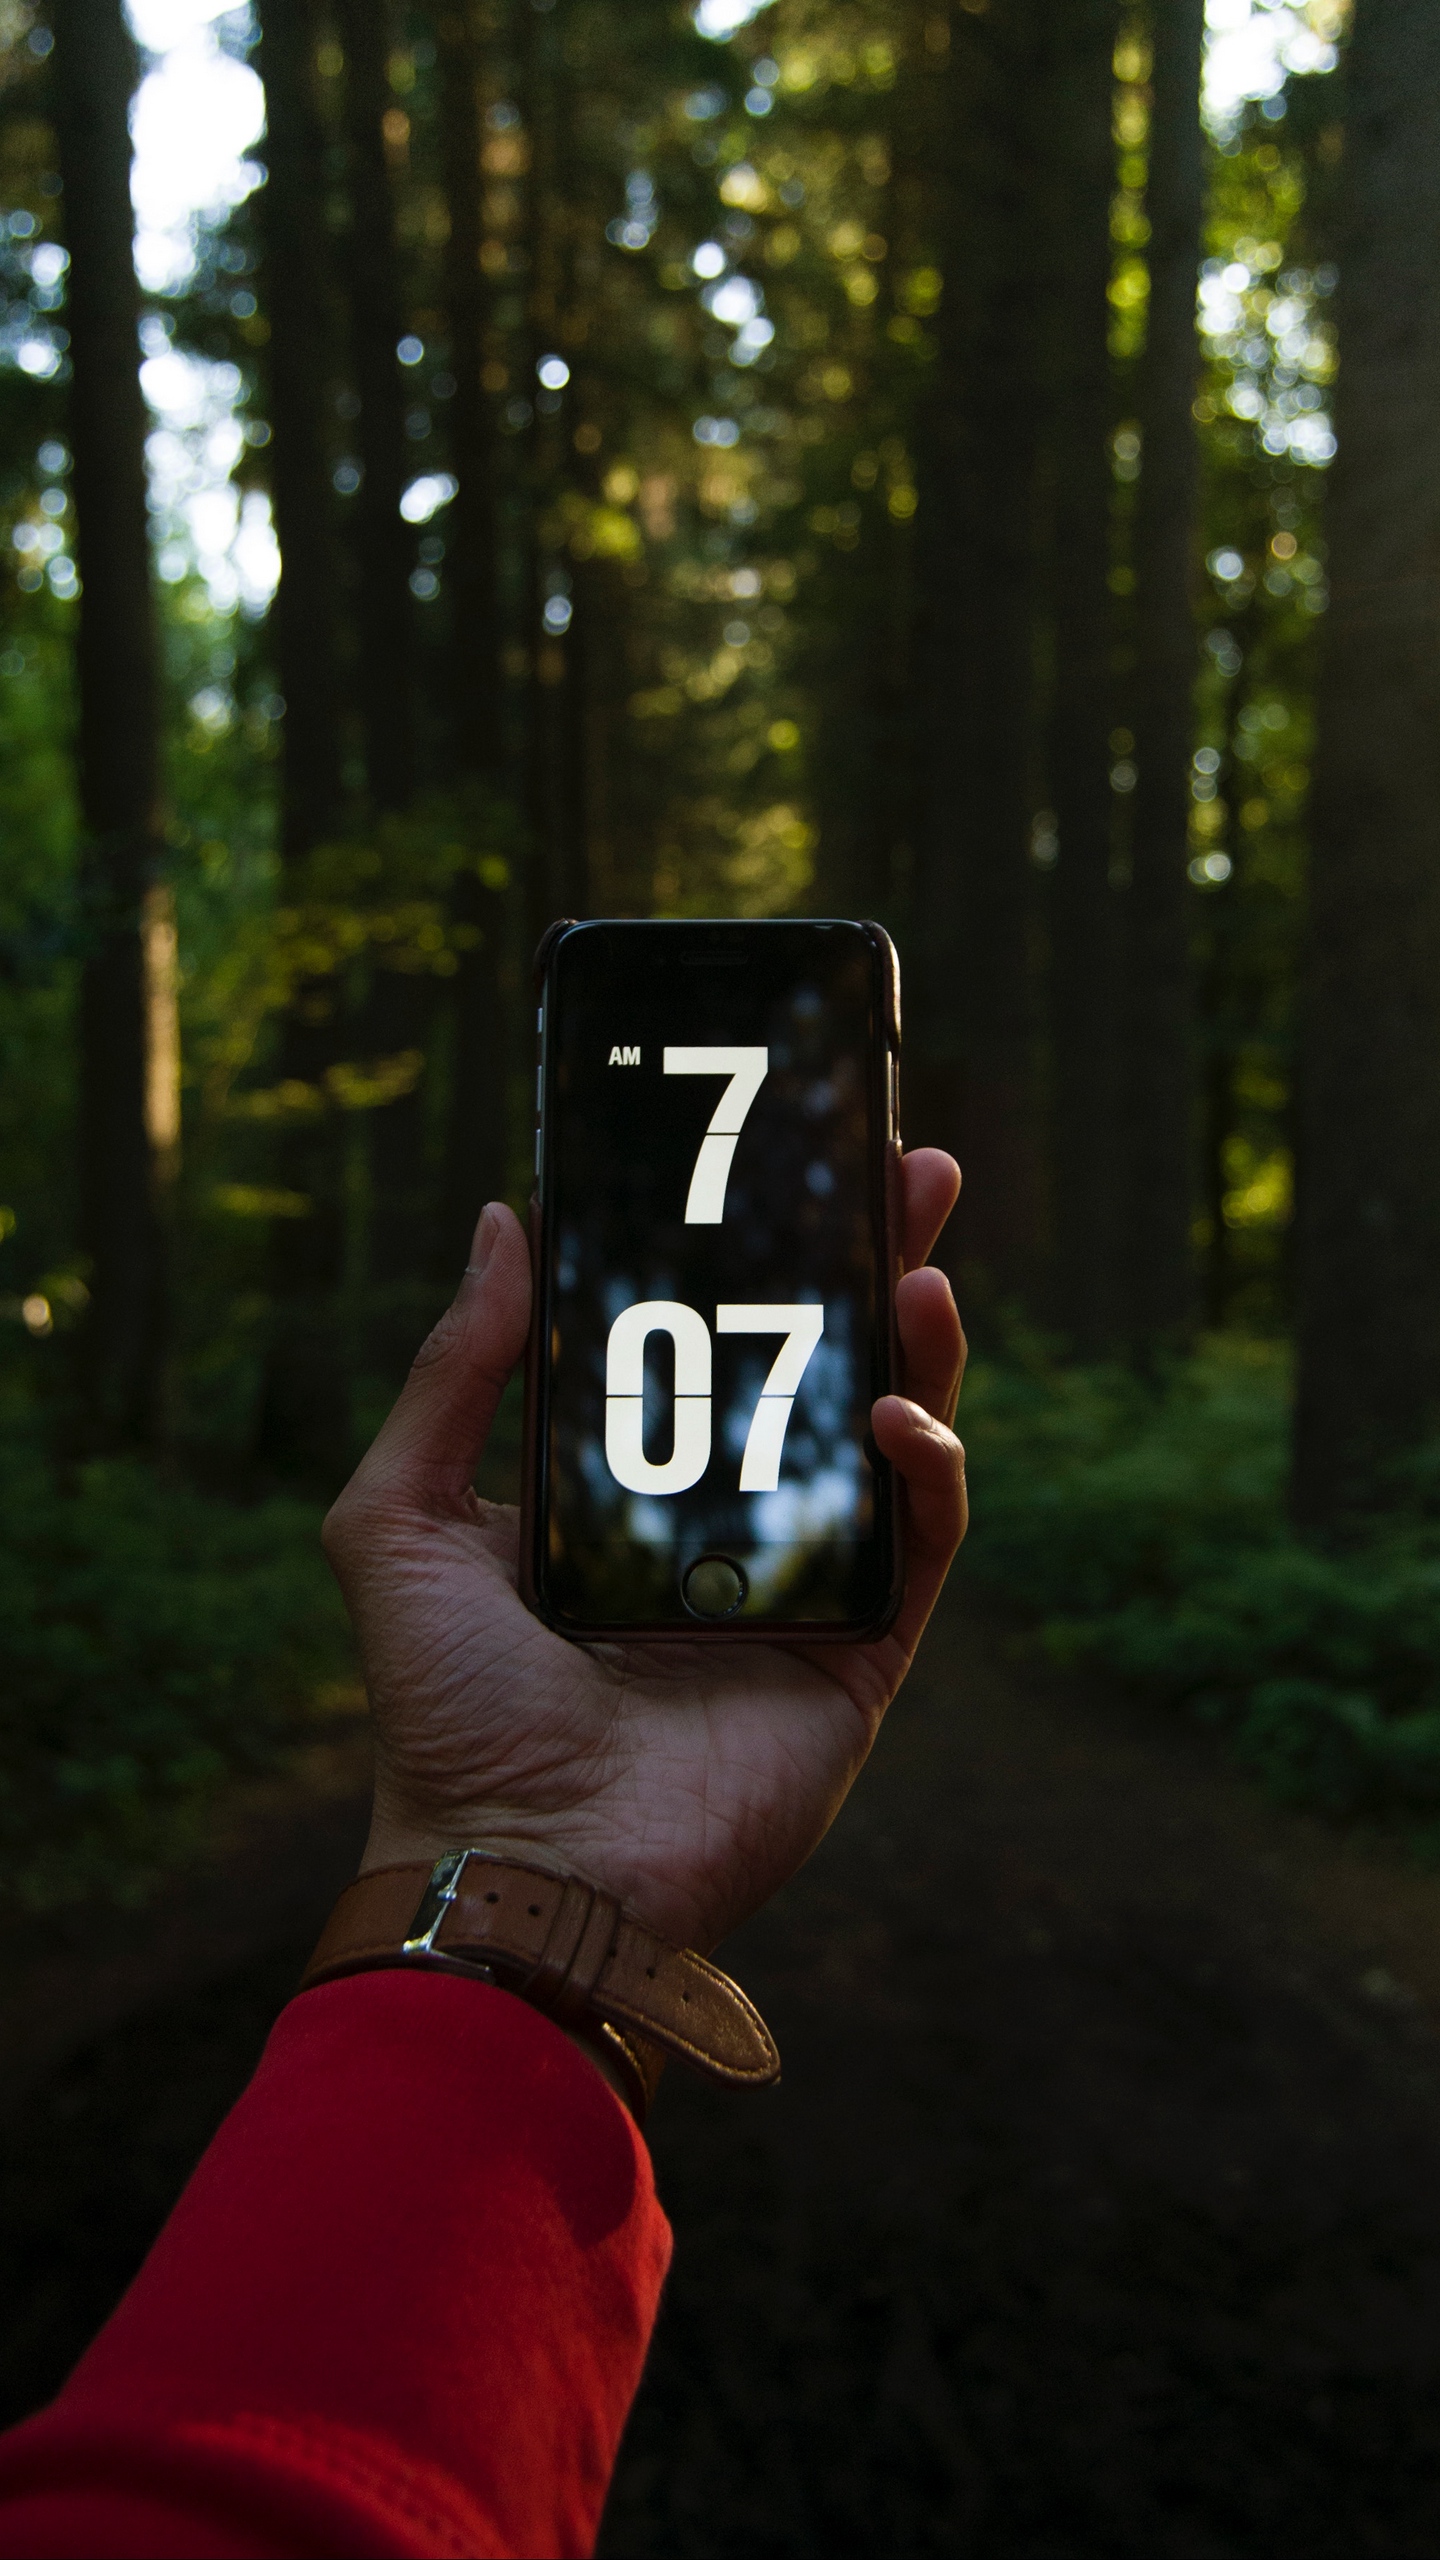 Download wallpaper 1440x2560 phone, hand, time, forest